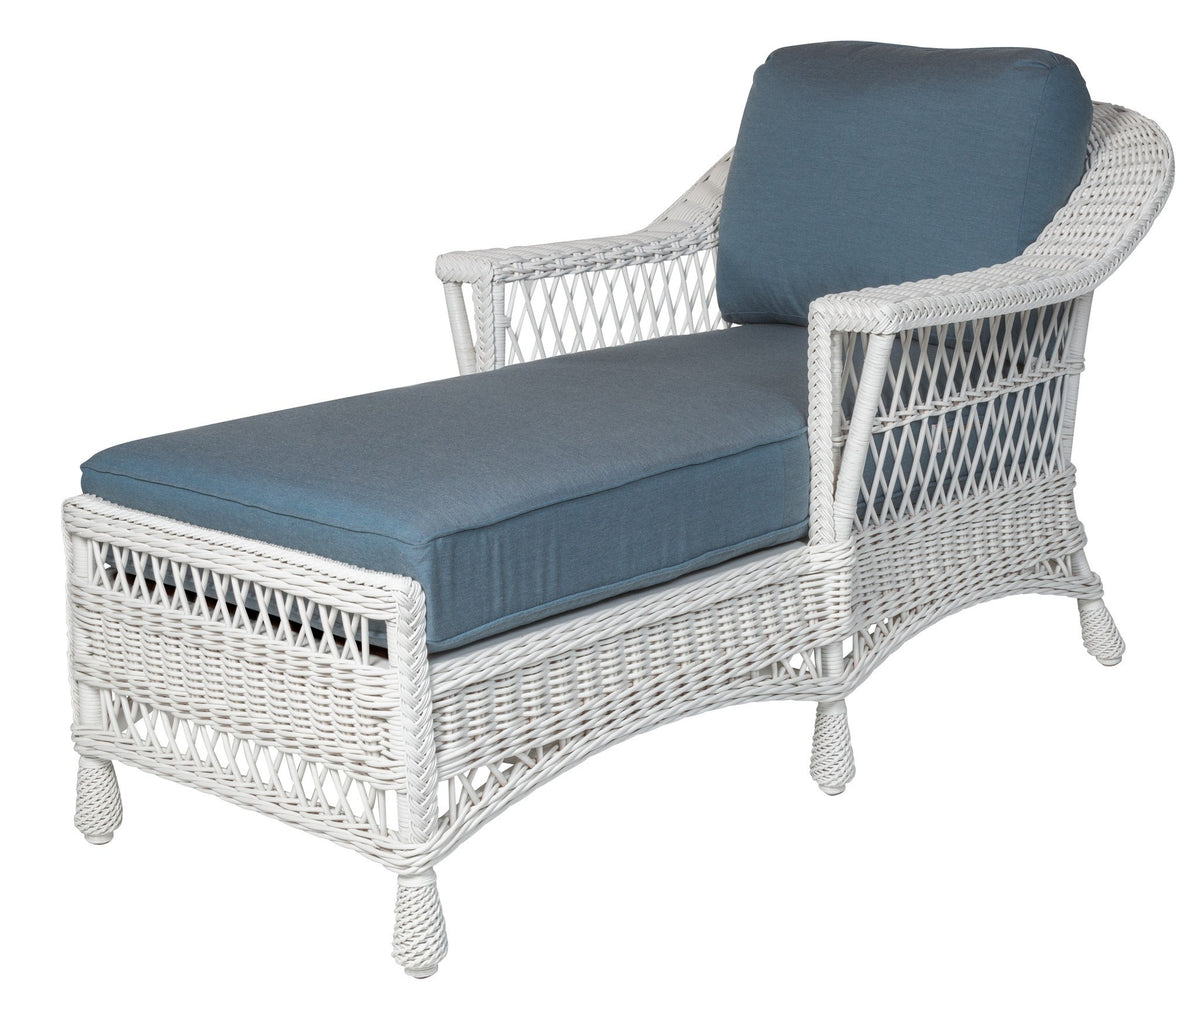 Designer Wicker &amp; Rattan By Tribor Designer Wicker Bar Harbor Chaise Lounge Chair Lounge Chair - Rattan Imports